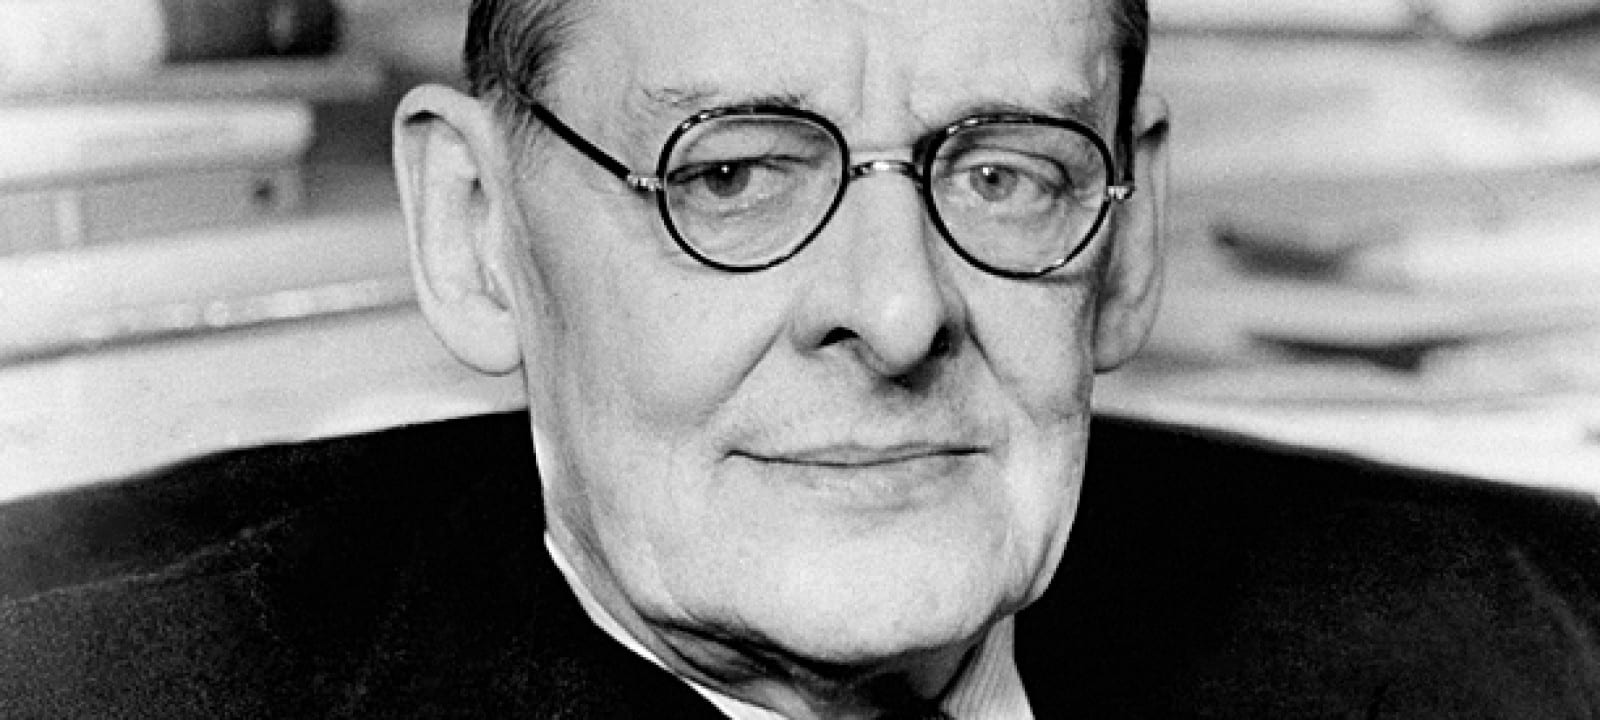 T.S. Eliot Overview: A Biography Of T. S. Eliot